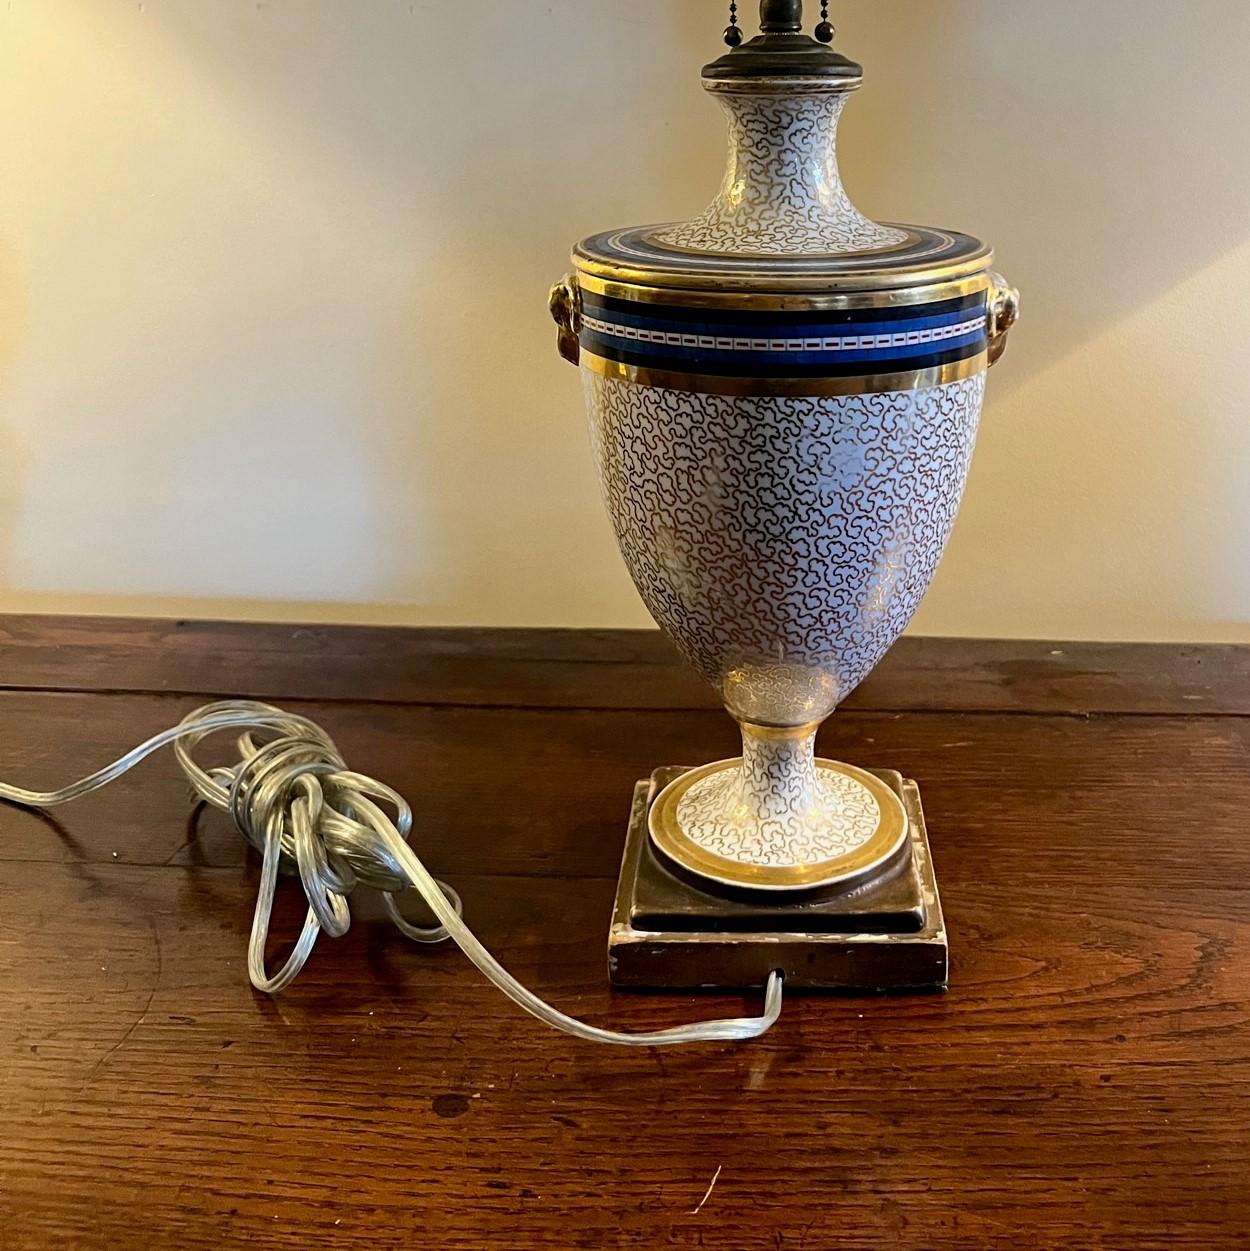 Brass 19th Century English Painted Porcelain Urn Converted to Table Lamp